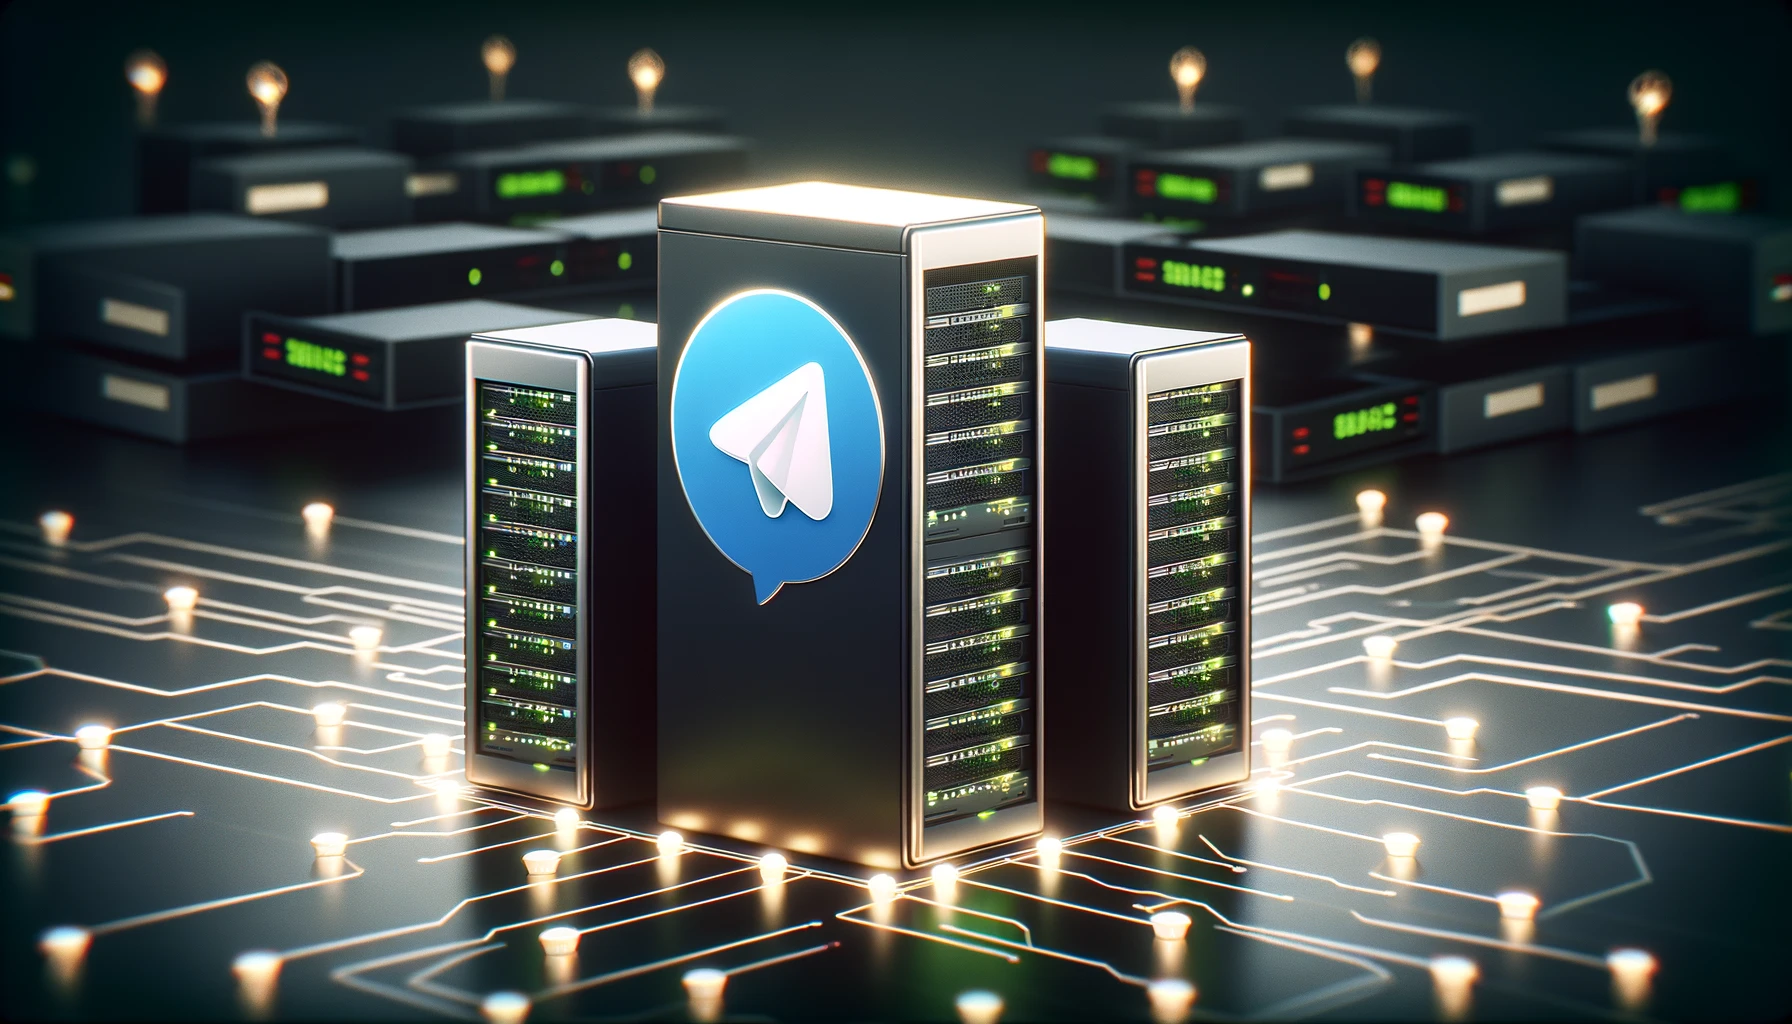 DALL·E 2024-02-18 19.58.36 - Create an image featuring the Telegram logo at the center, with multiple servers surrounding it, in a 16_9 aspect ratio. The servers should look moder